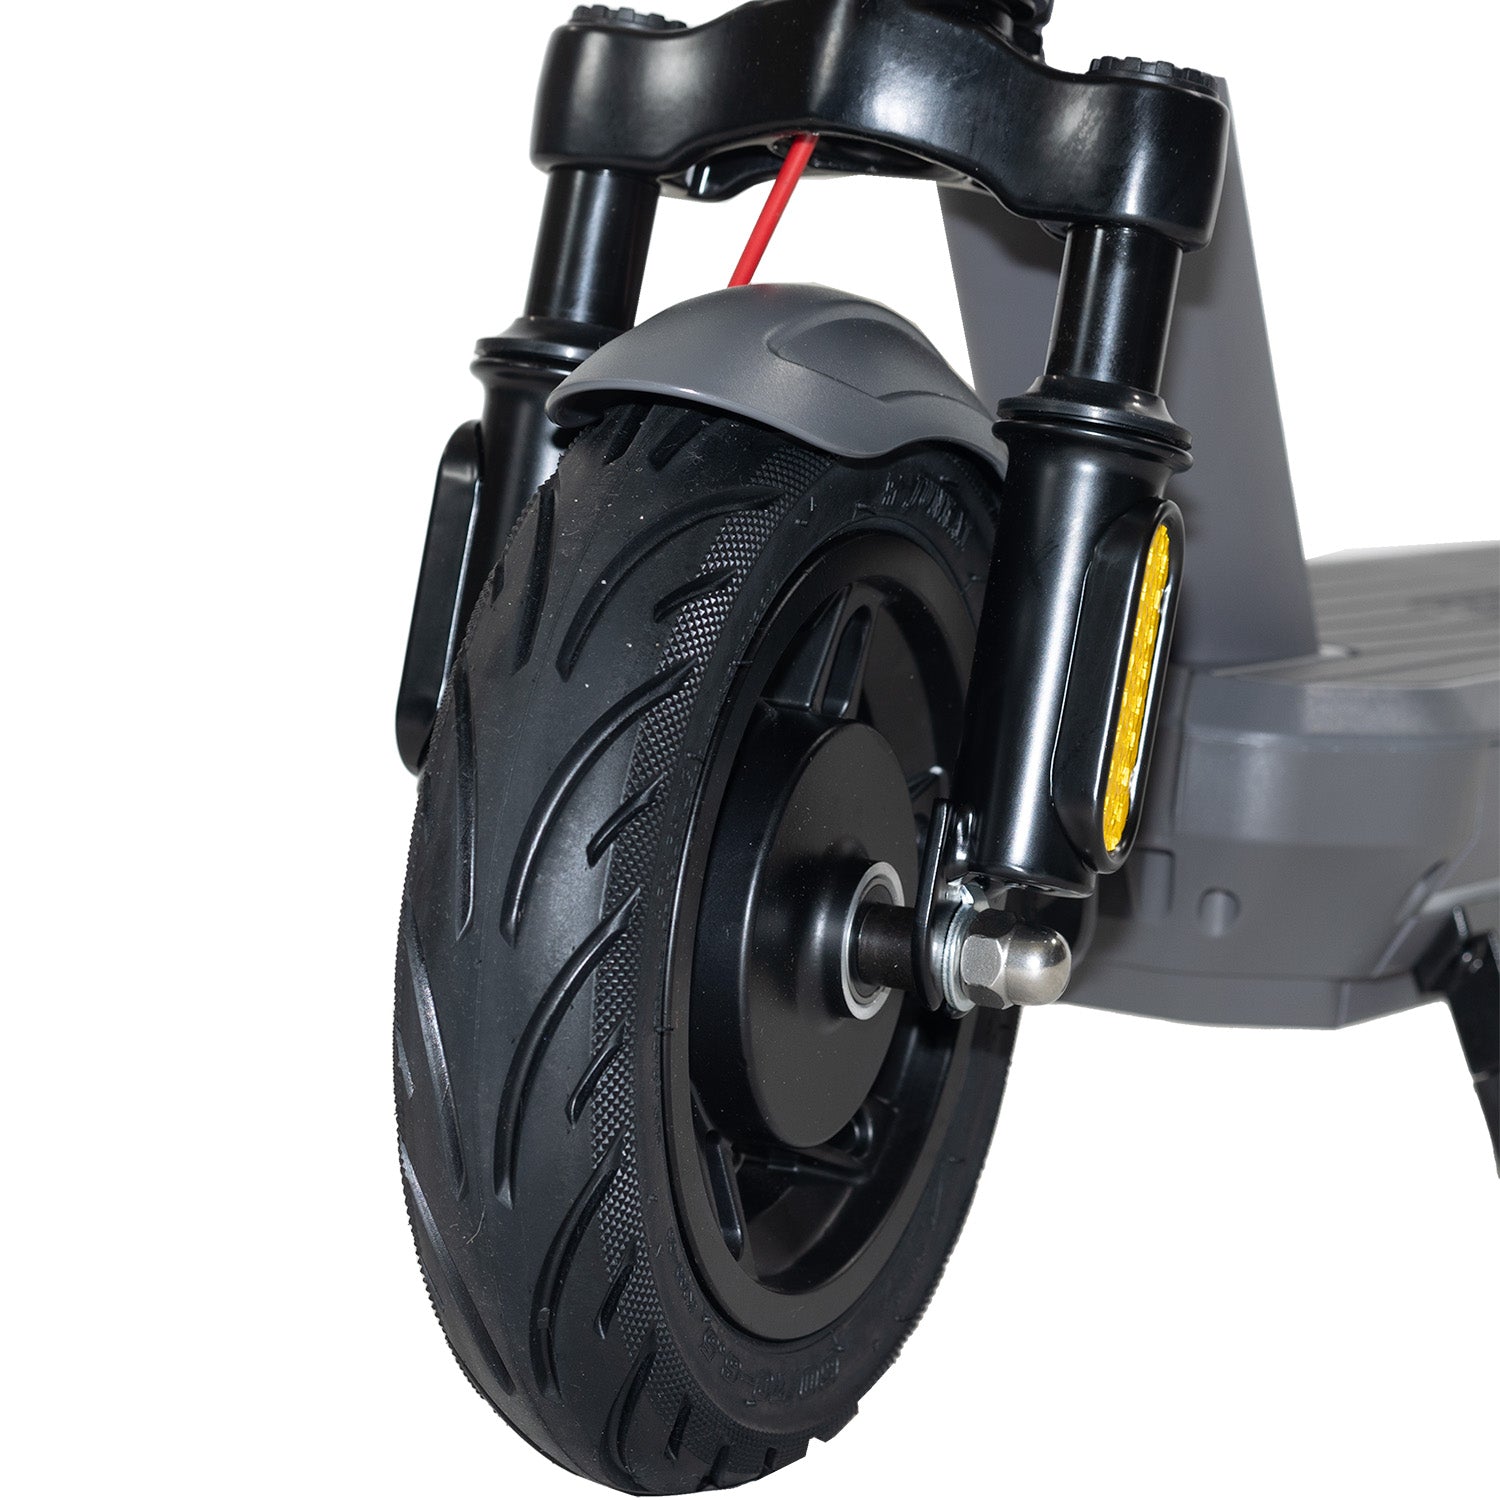 Der E-Scooter Tuning-Guide » E-Scooter Held